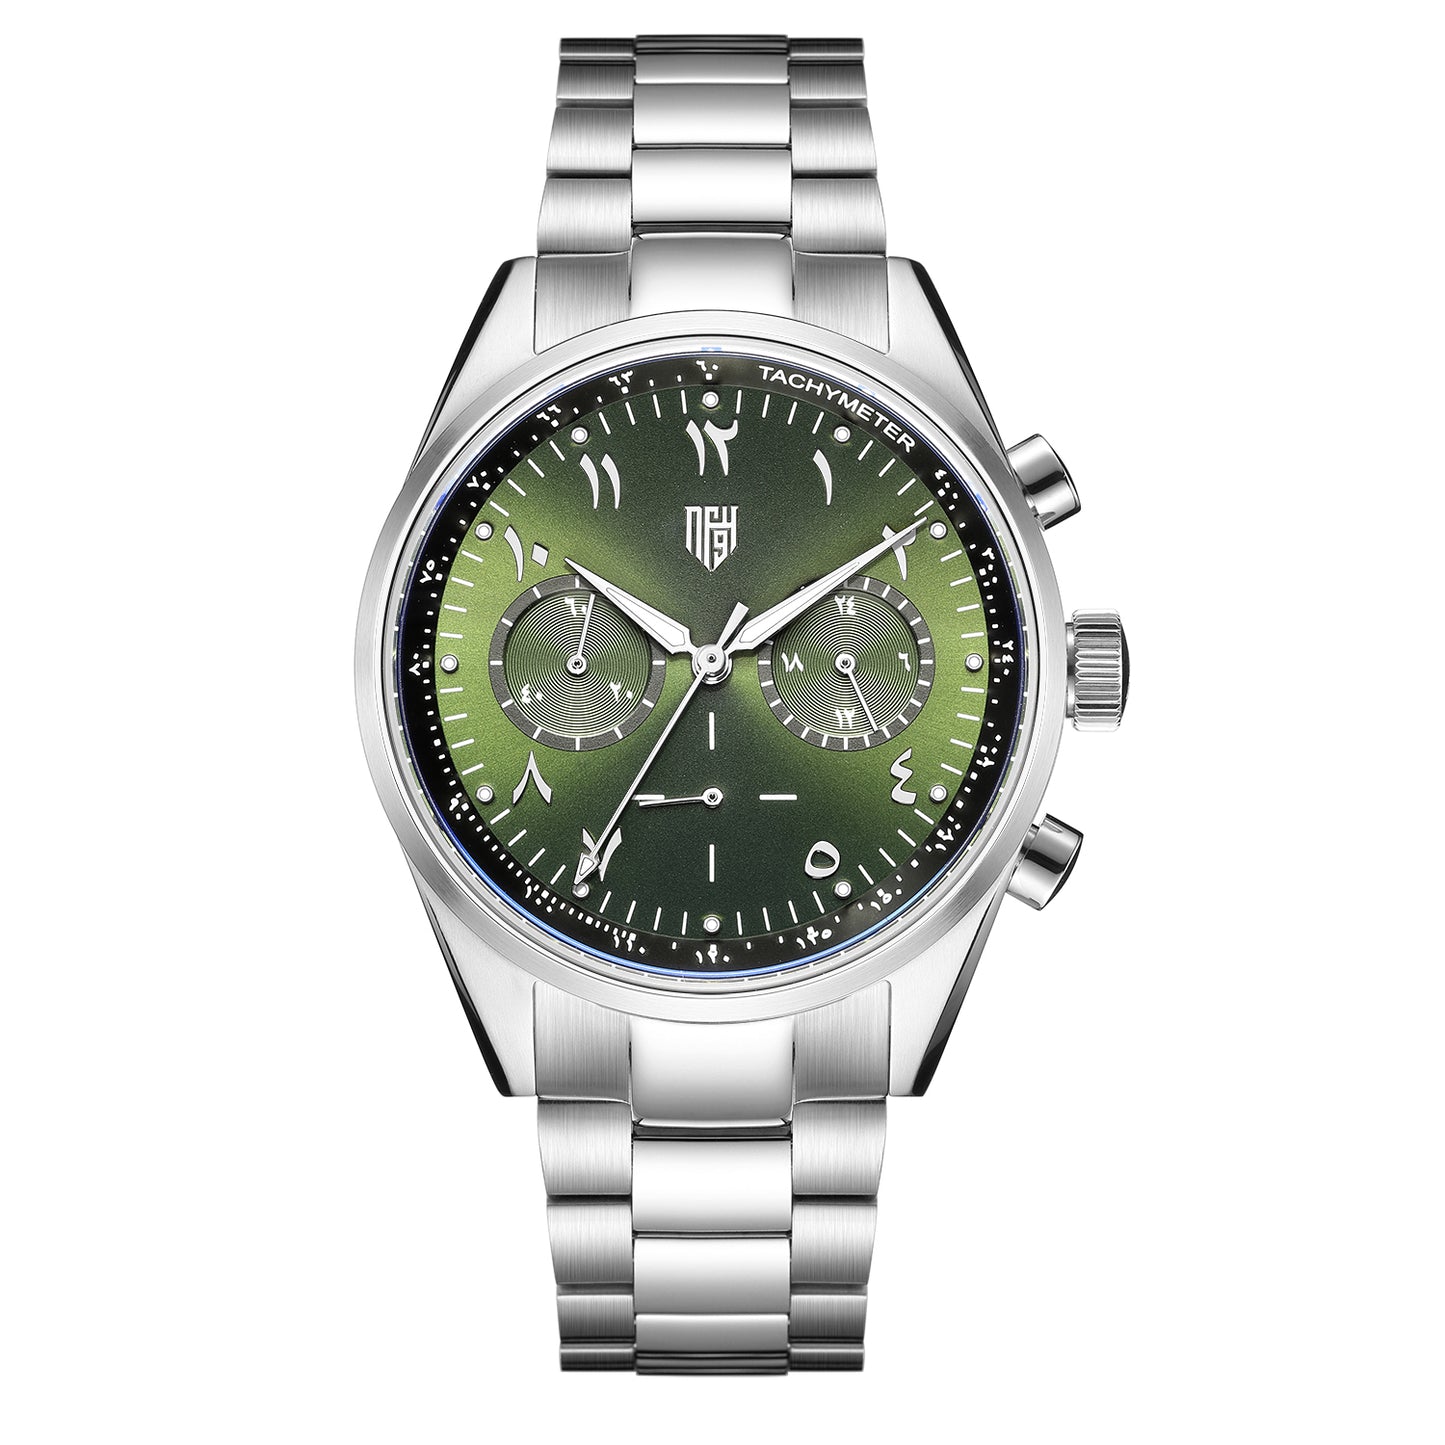 Culture Chronograph 2-Olive